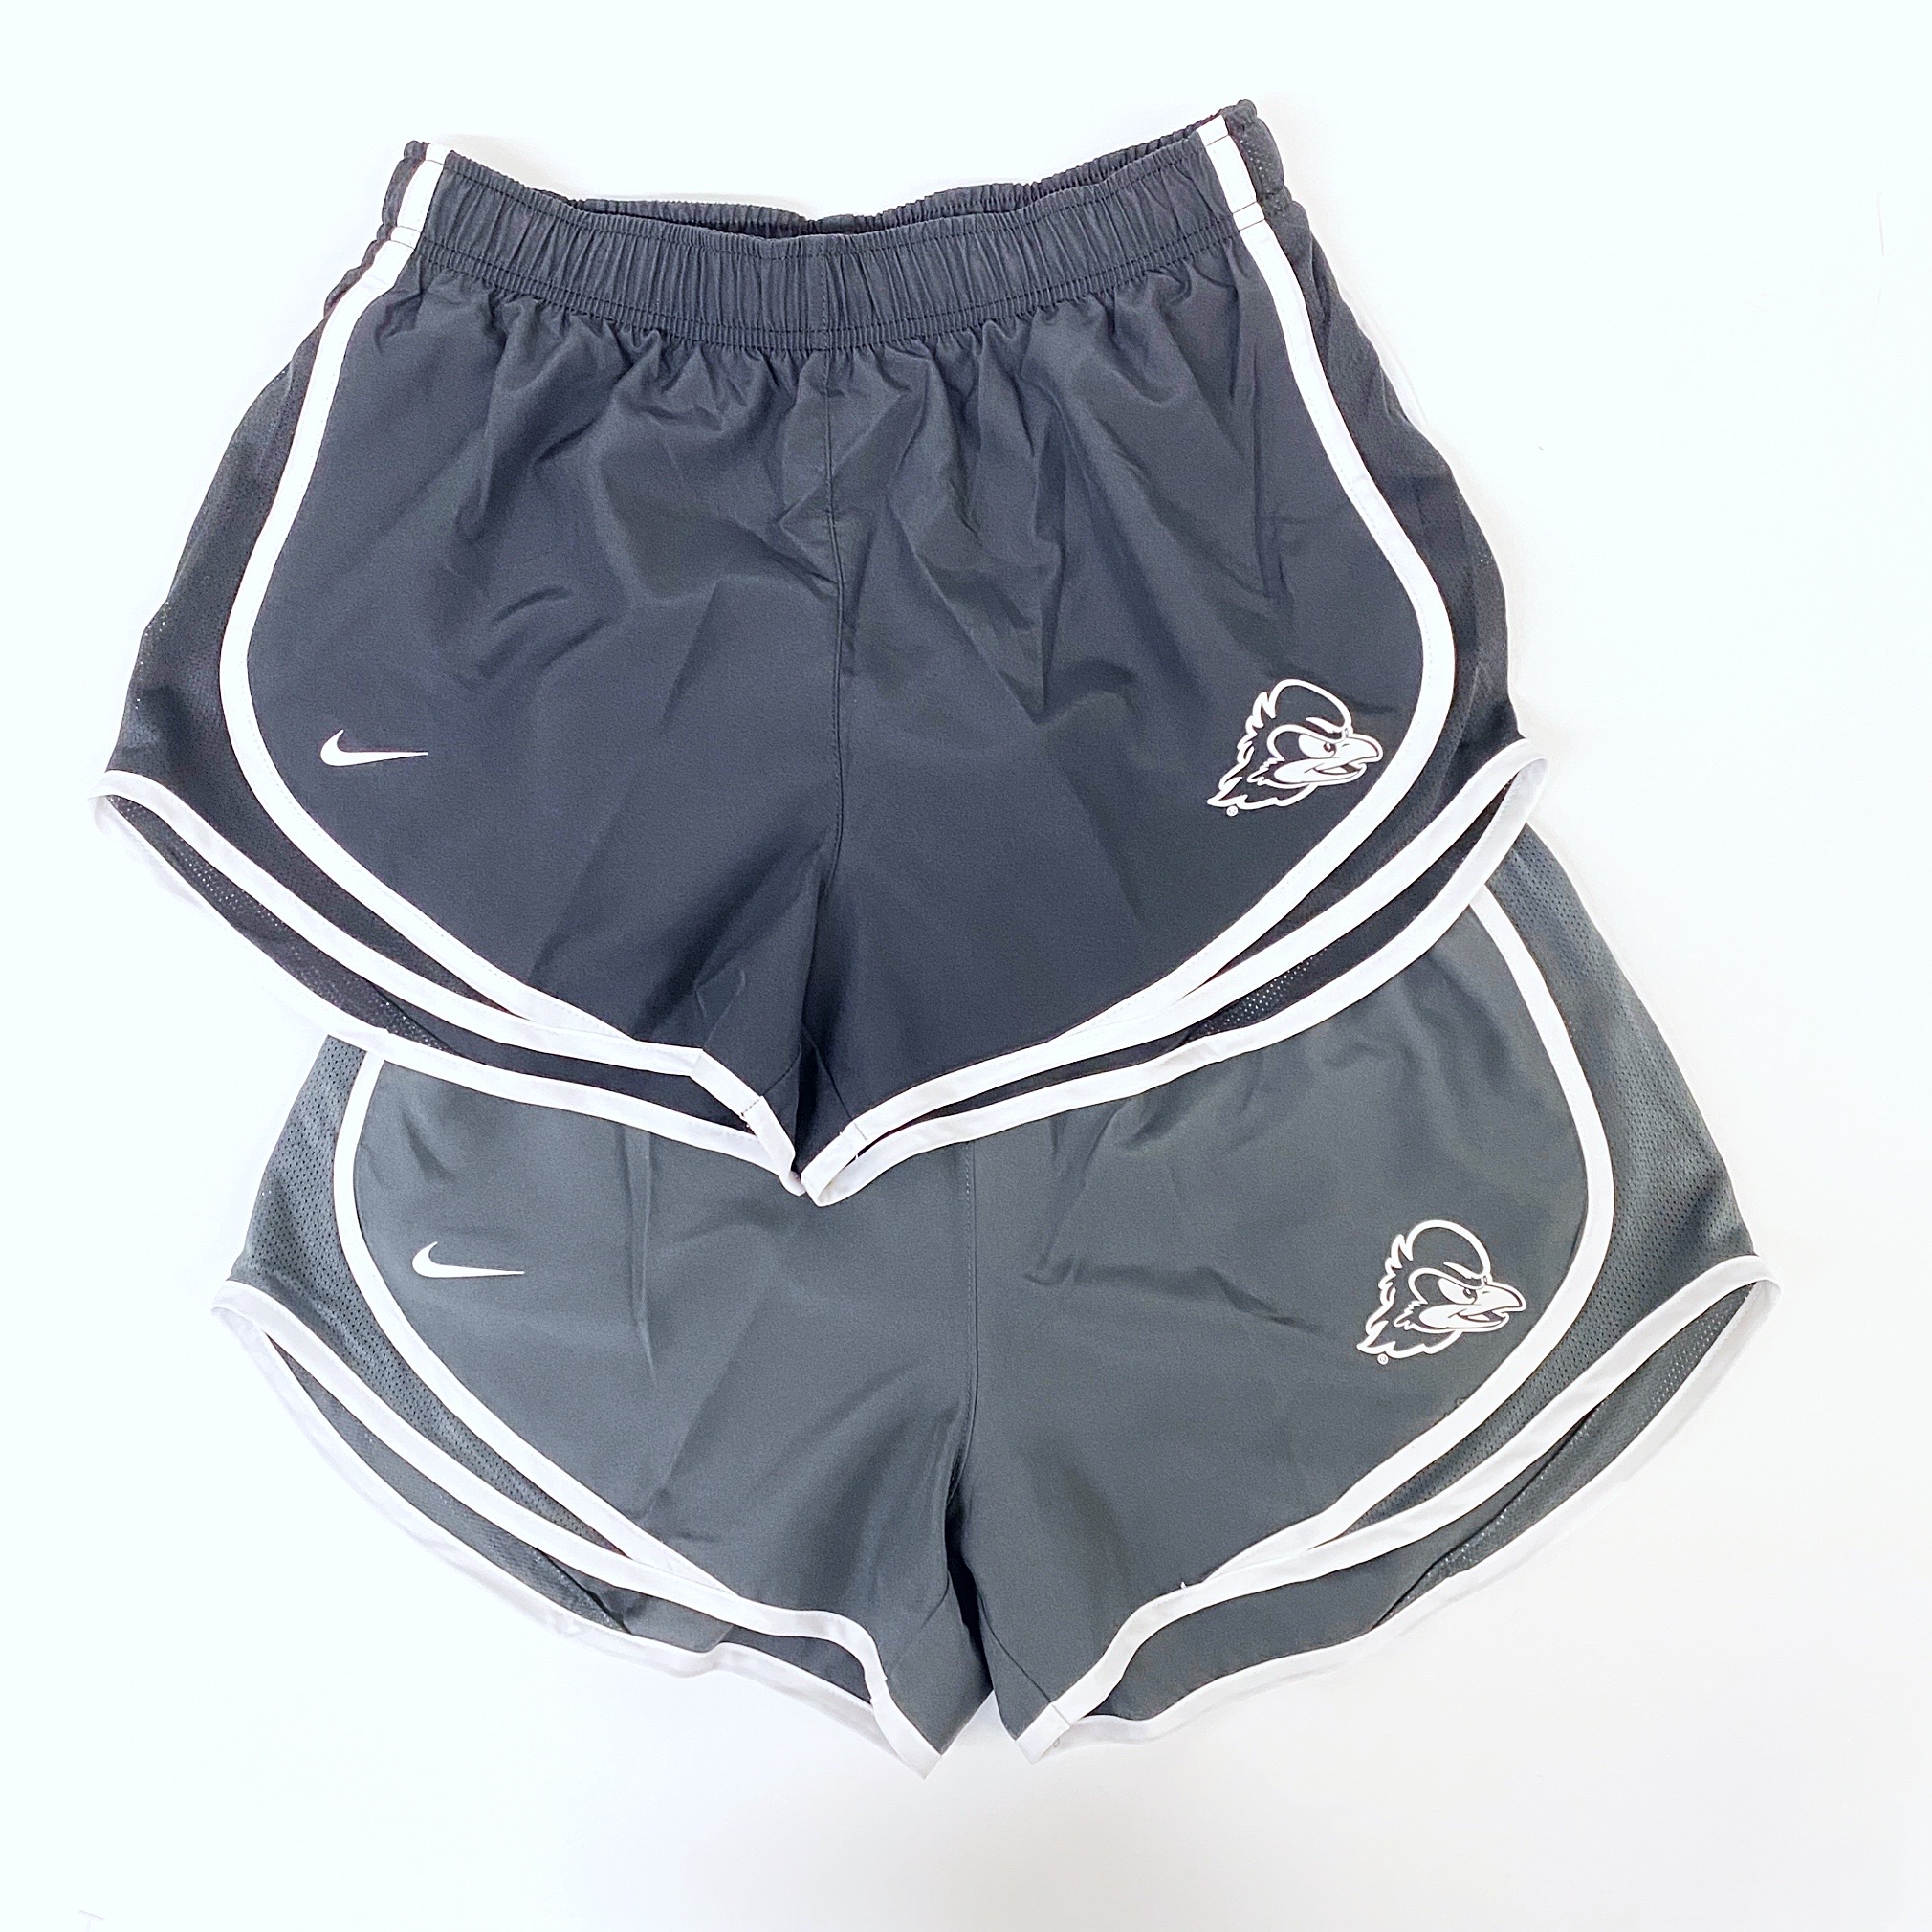 Nike Running tempo shorts in blue